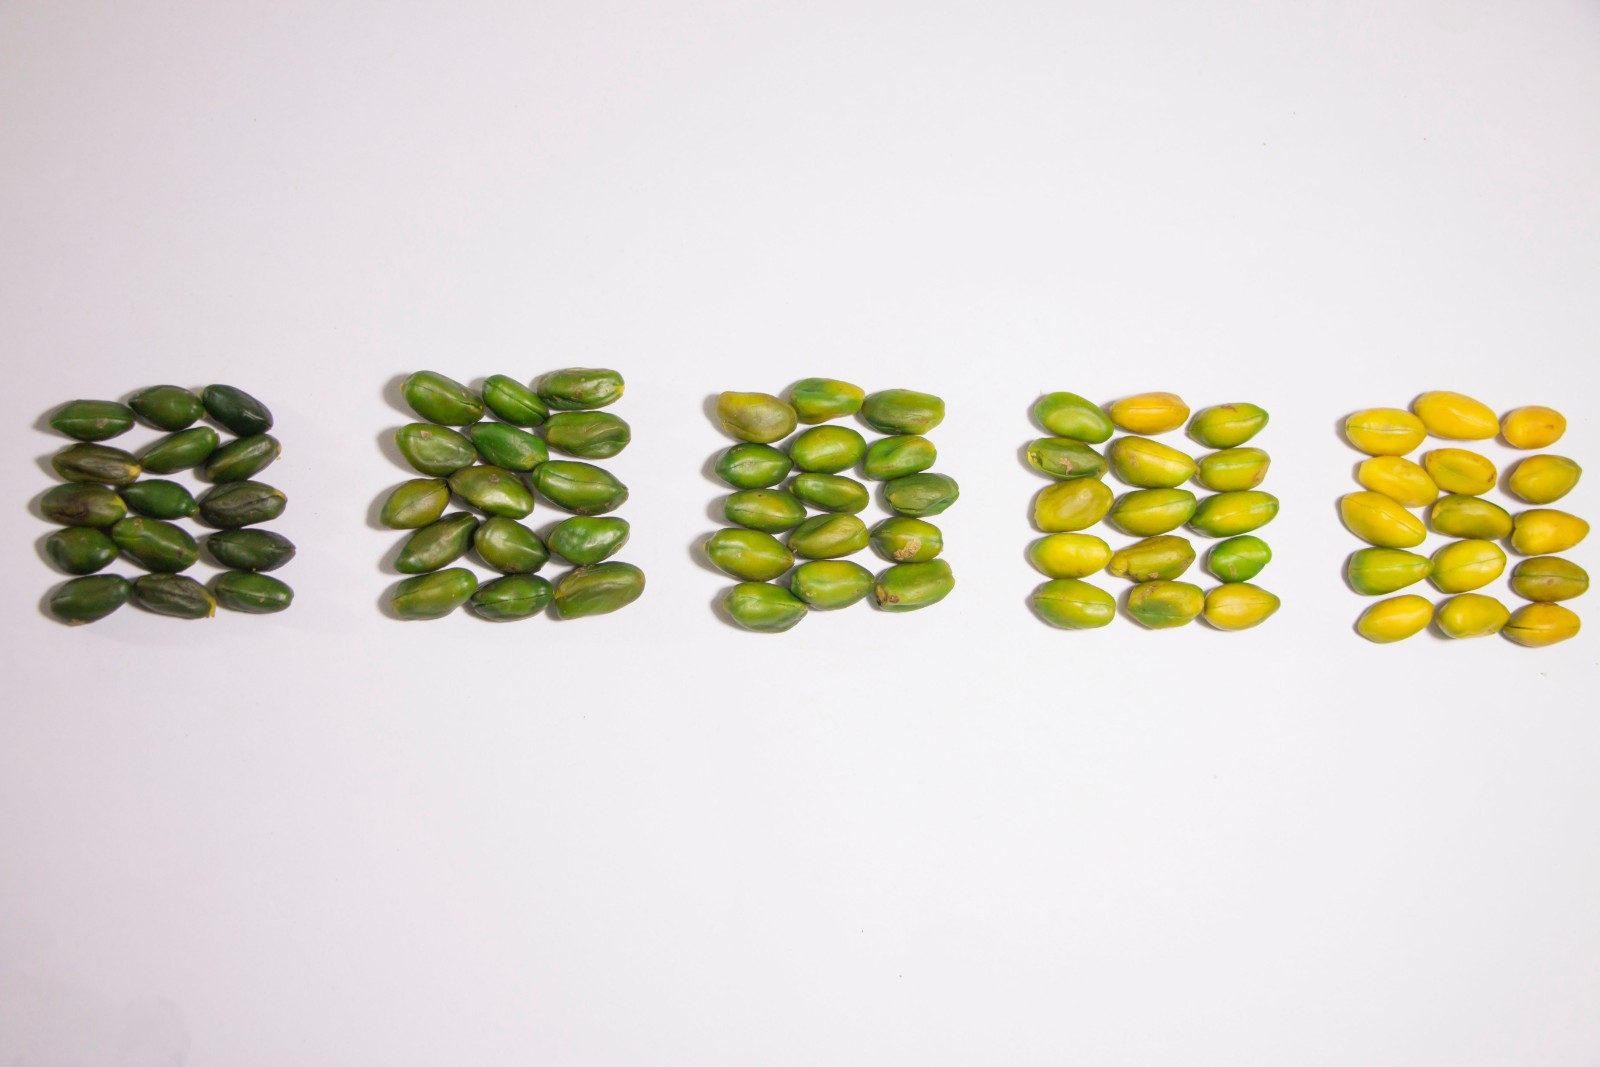  Price list of different grades of green pistachio kernels